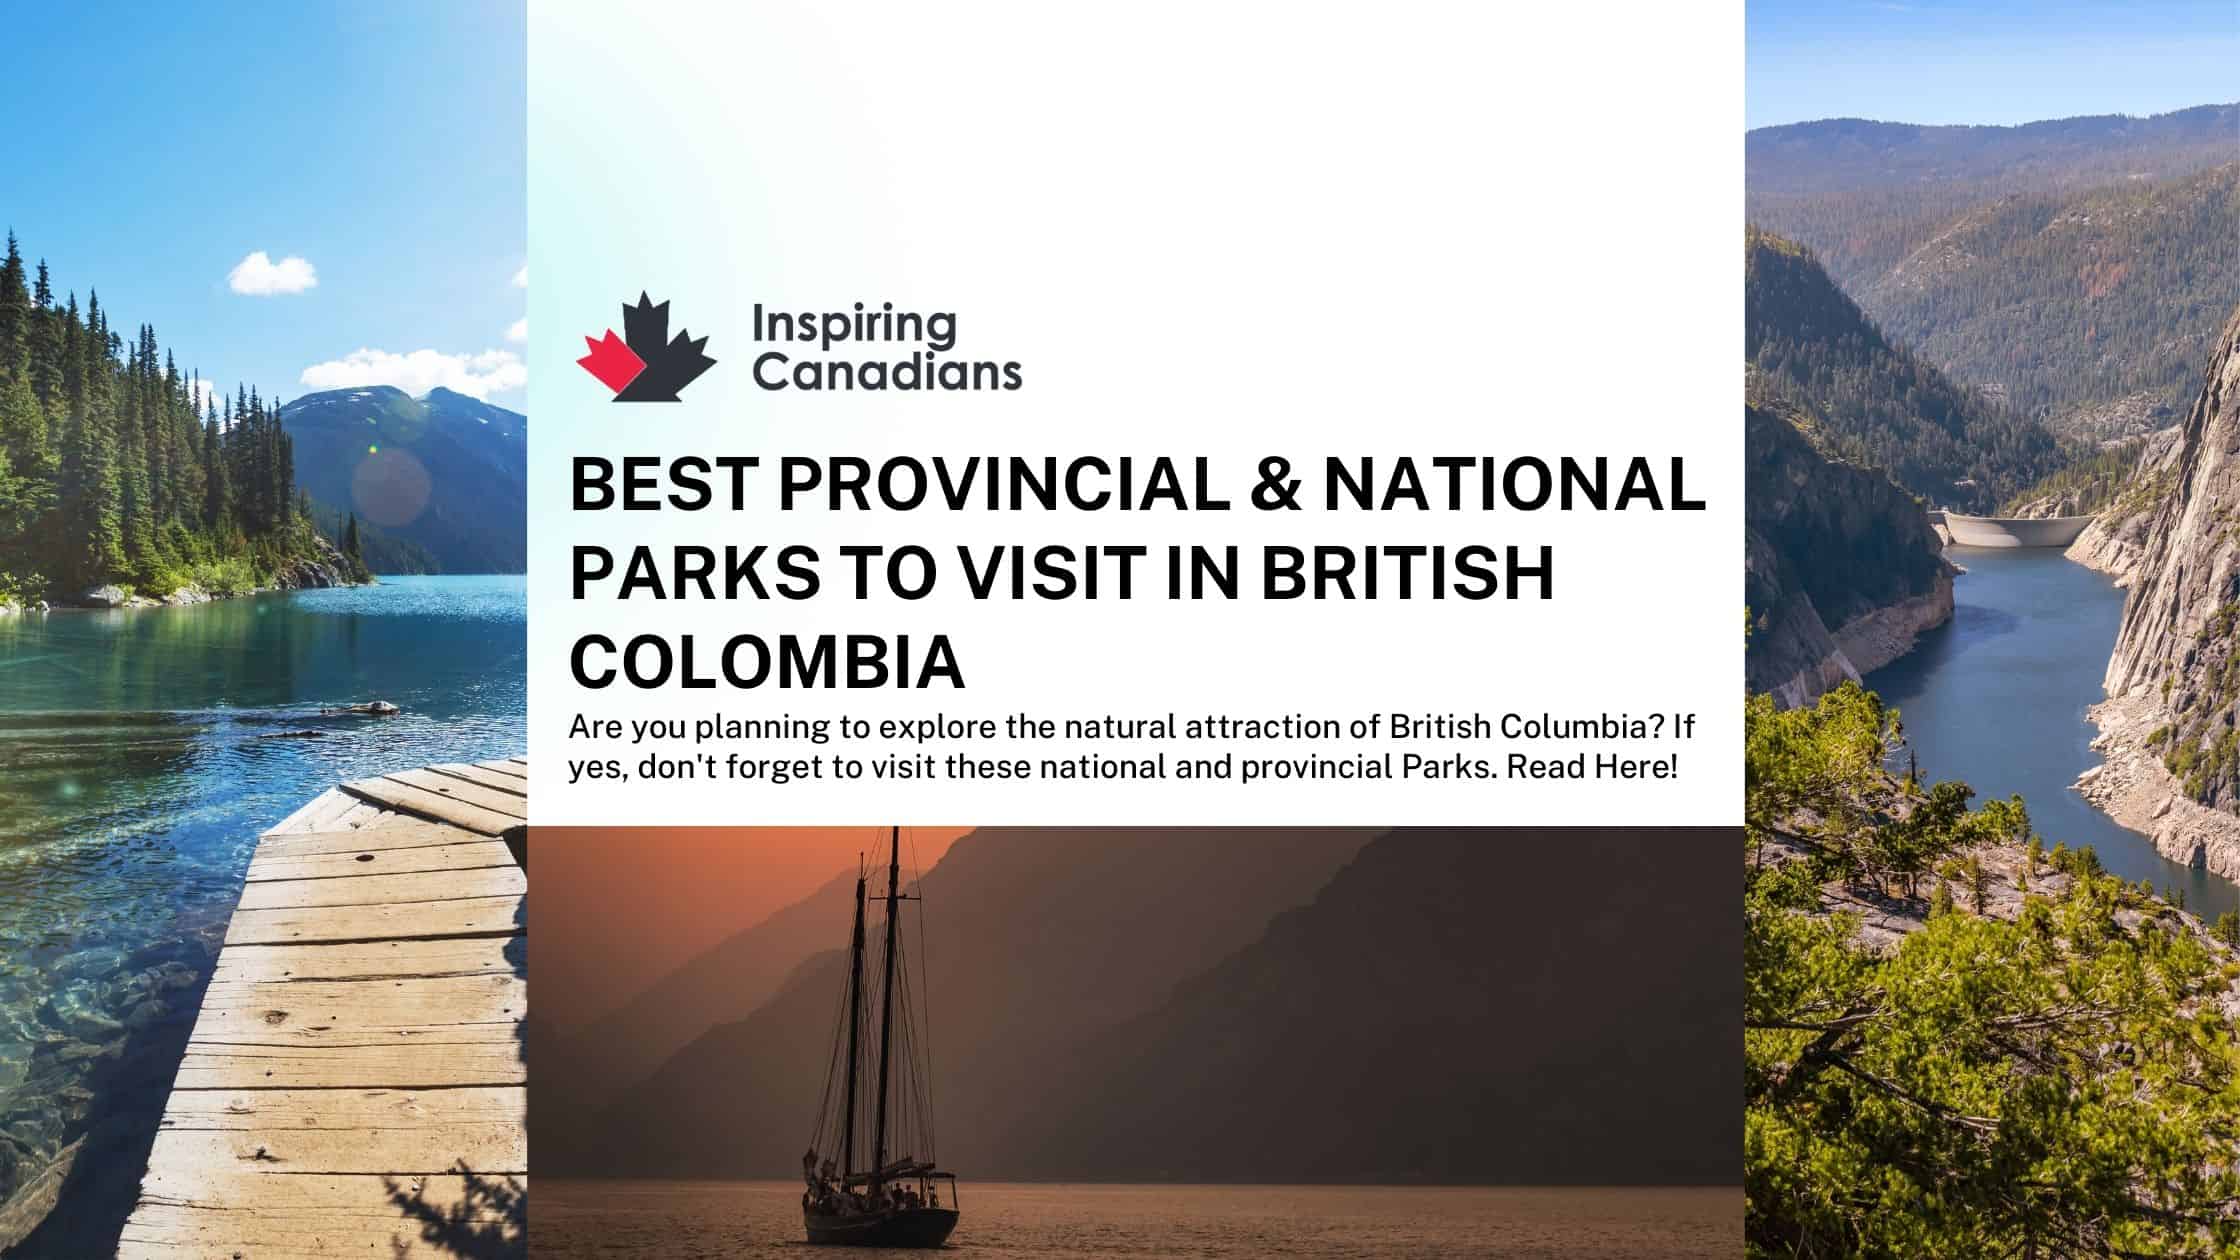 Best Provincial & National Parks to Visit in British Colombia